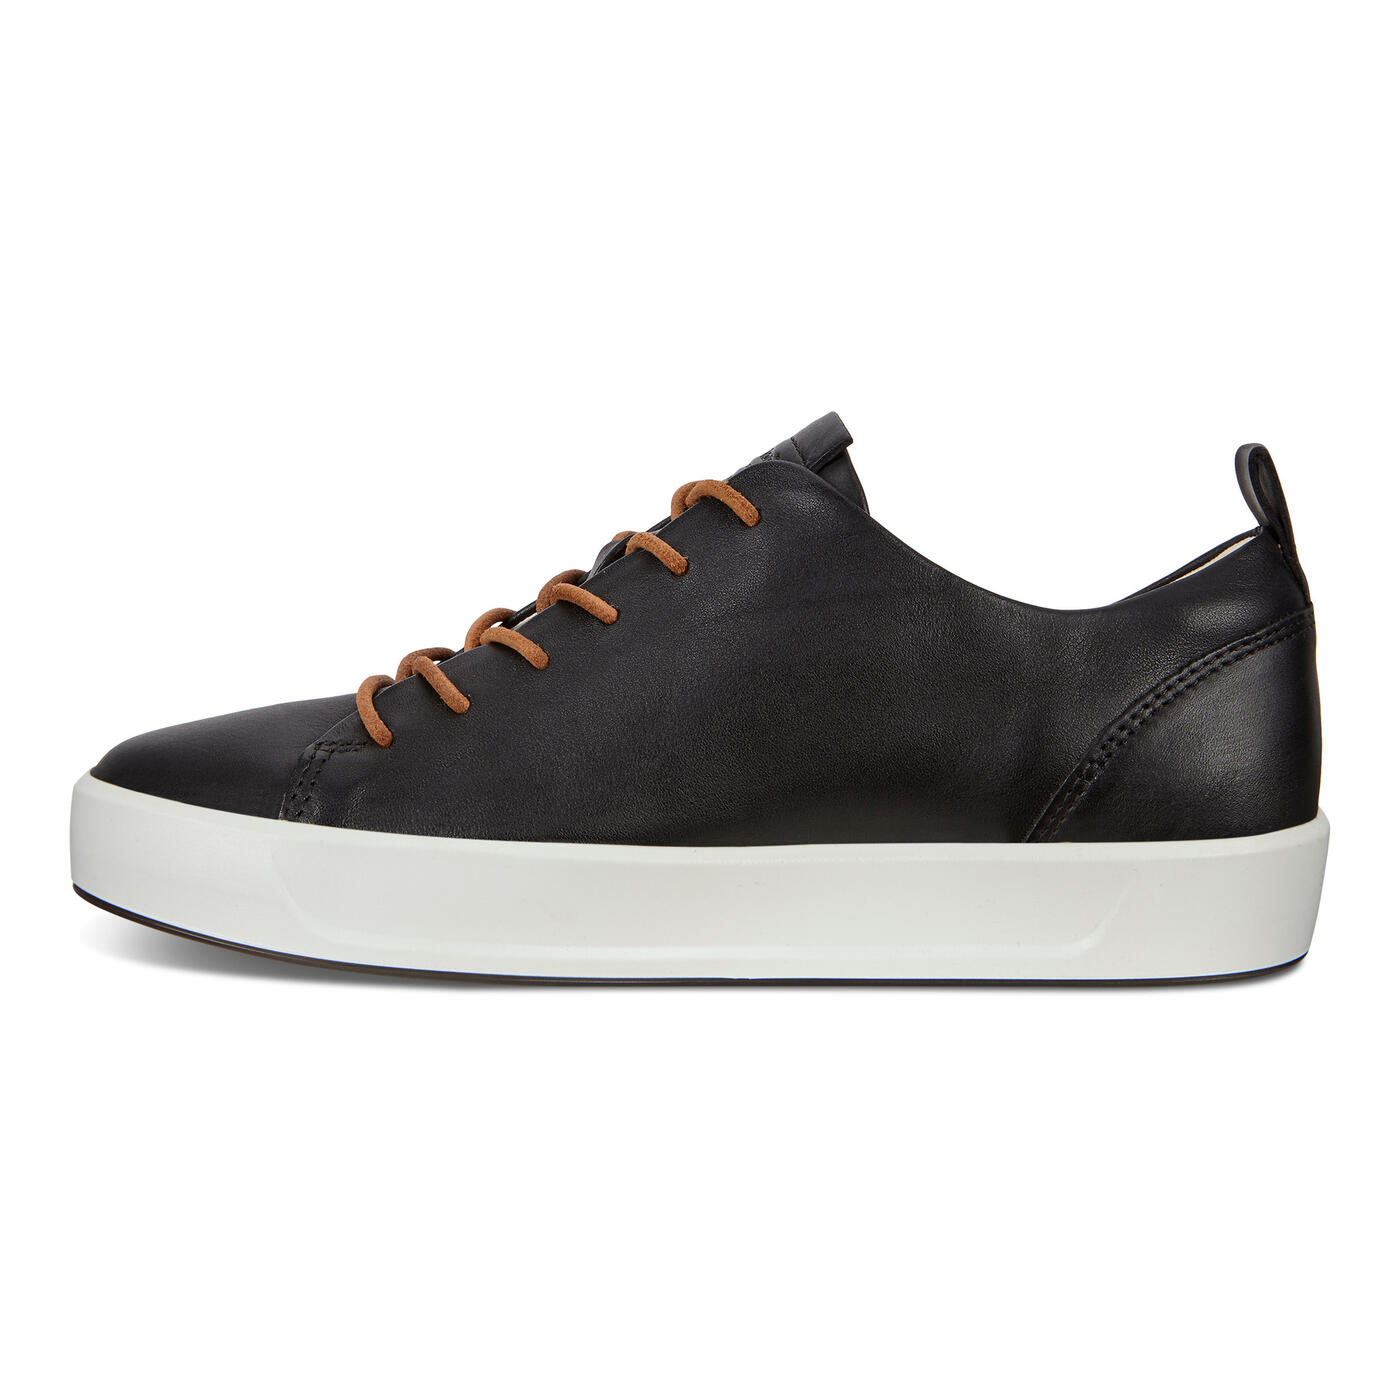 Women's Soft 8 Sneakers | Official Store | ECCO® Shoes